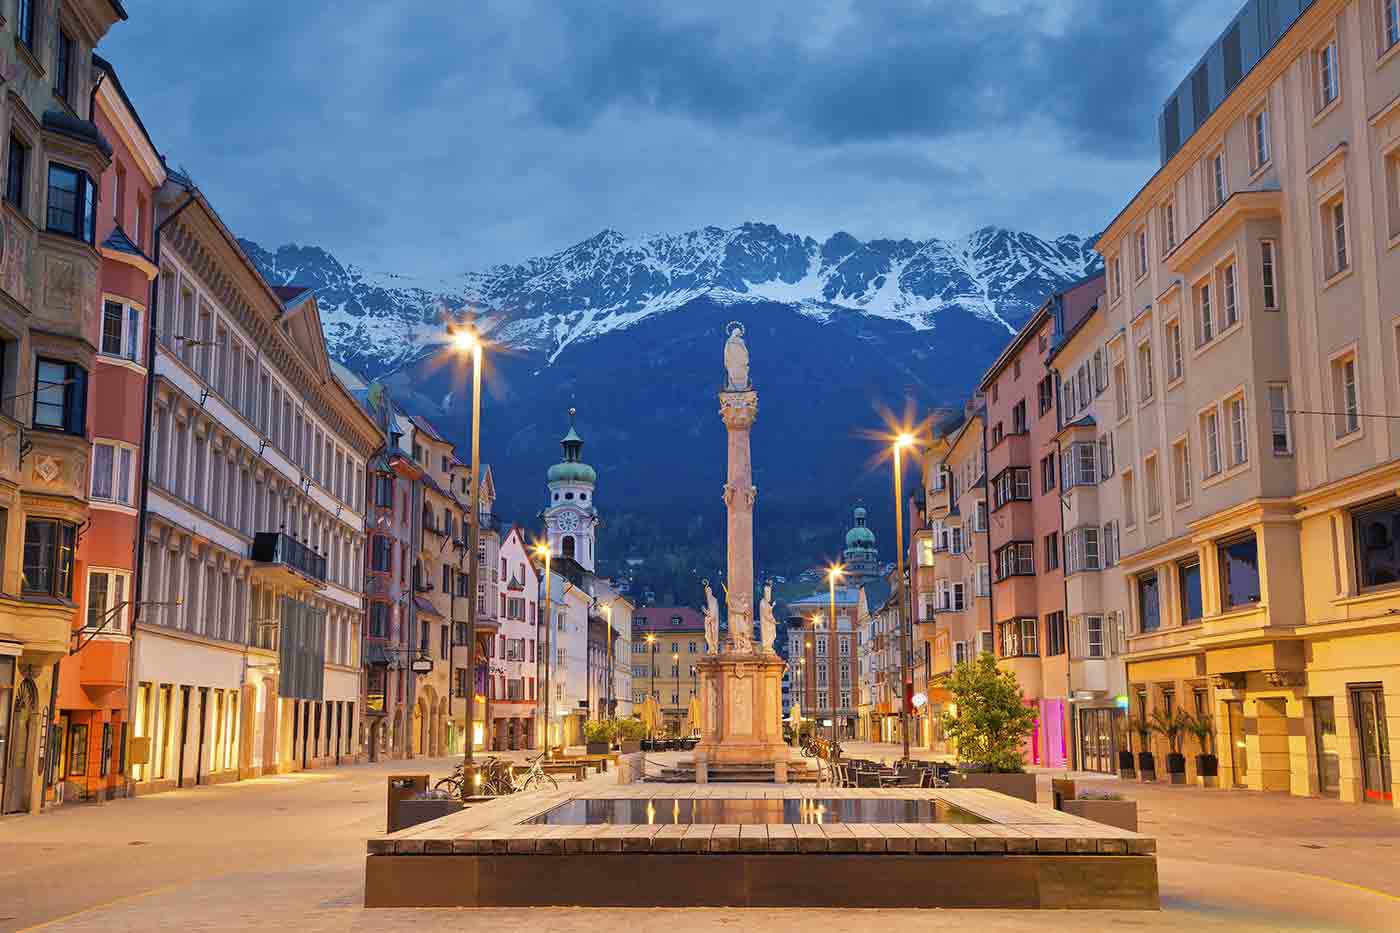 Tourist Attractions to Visit in Innsbruck